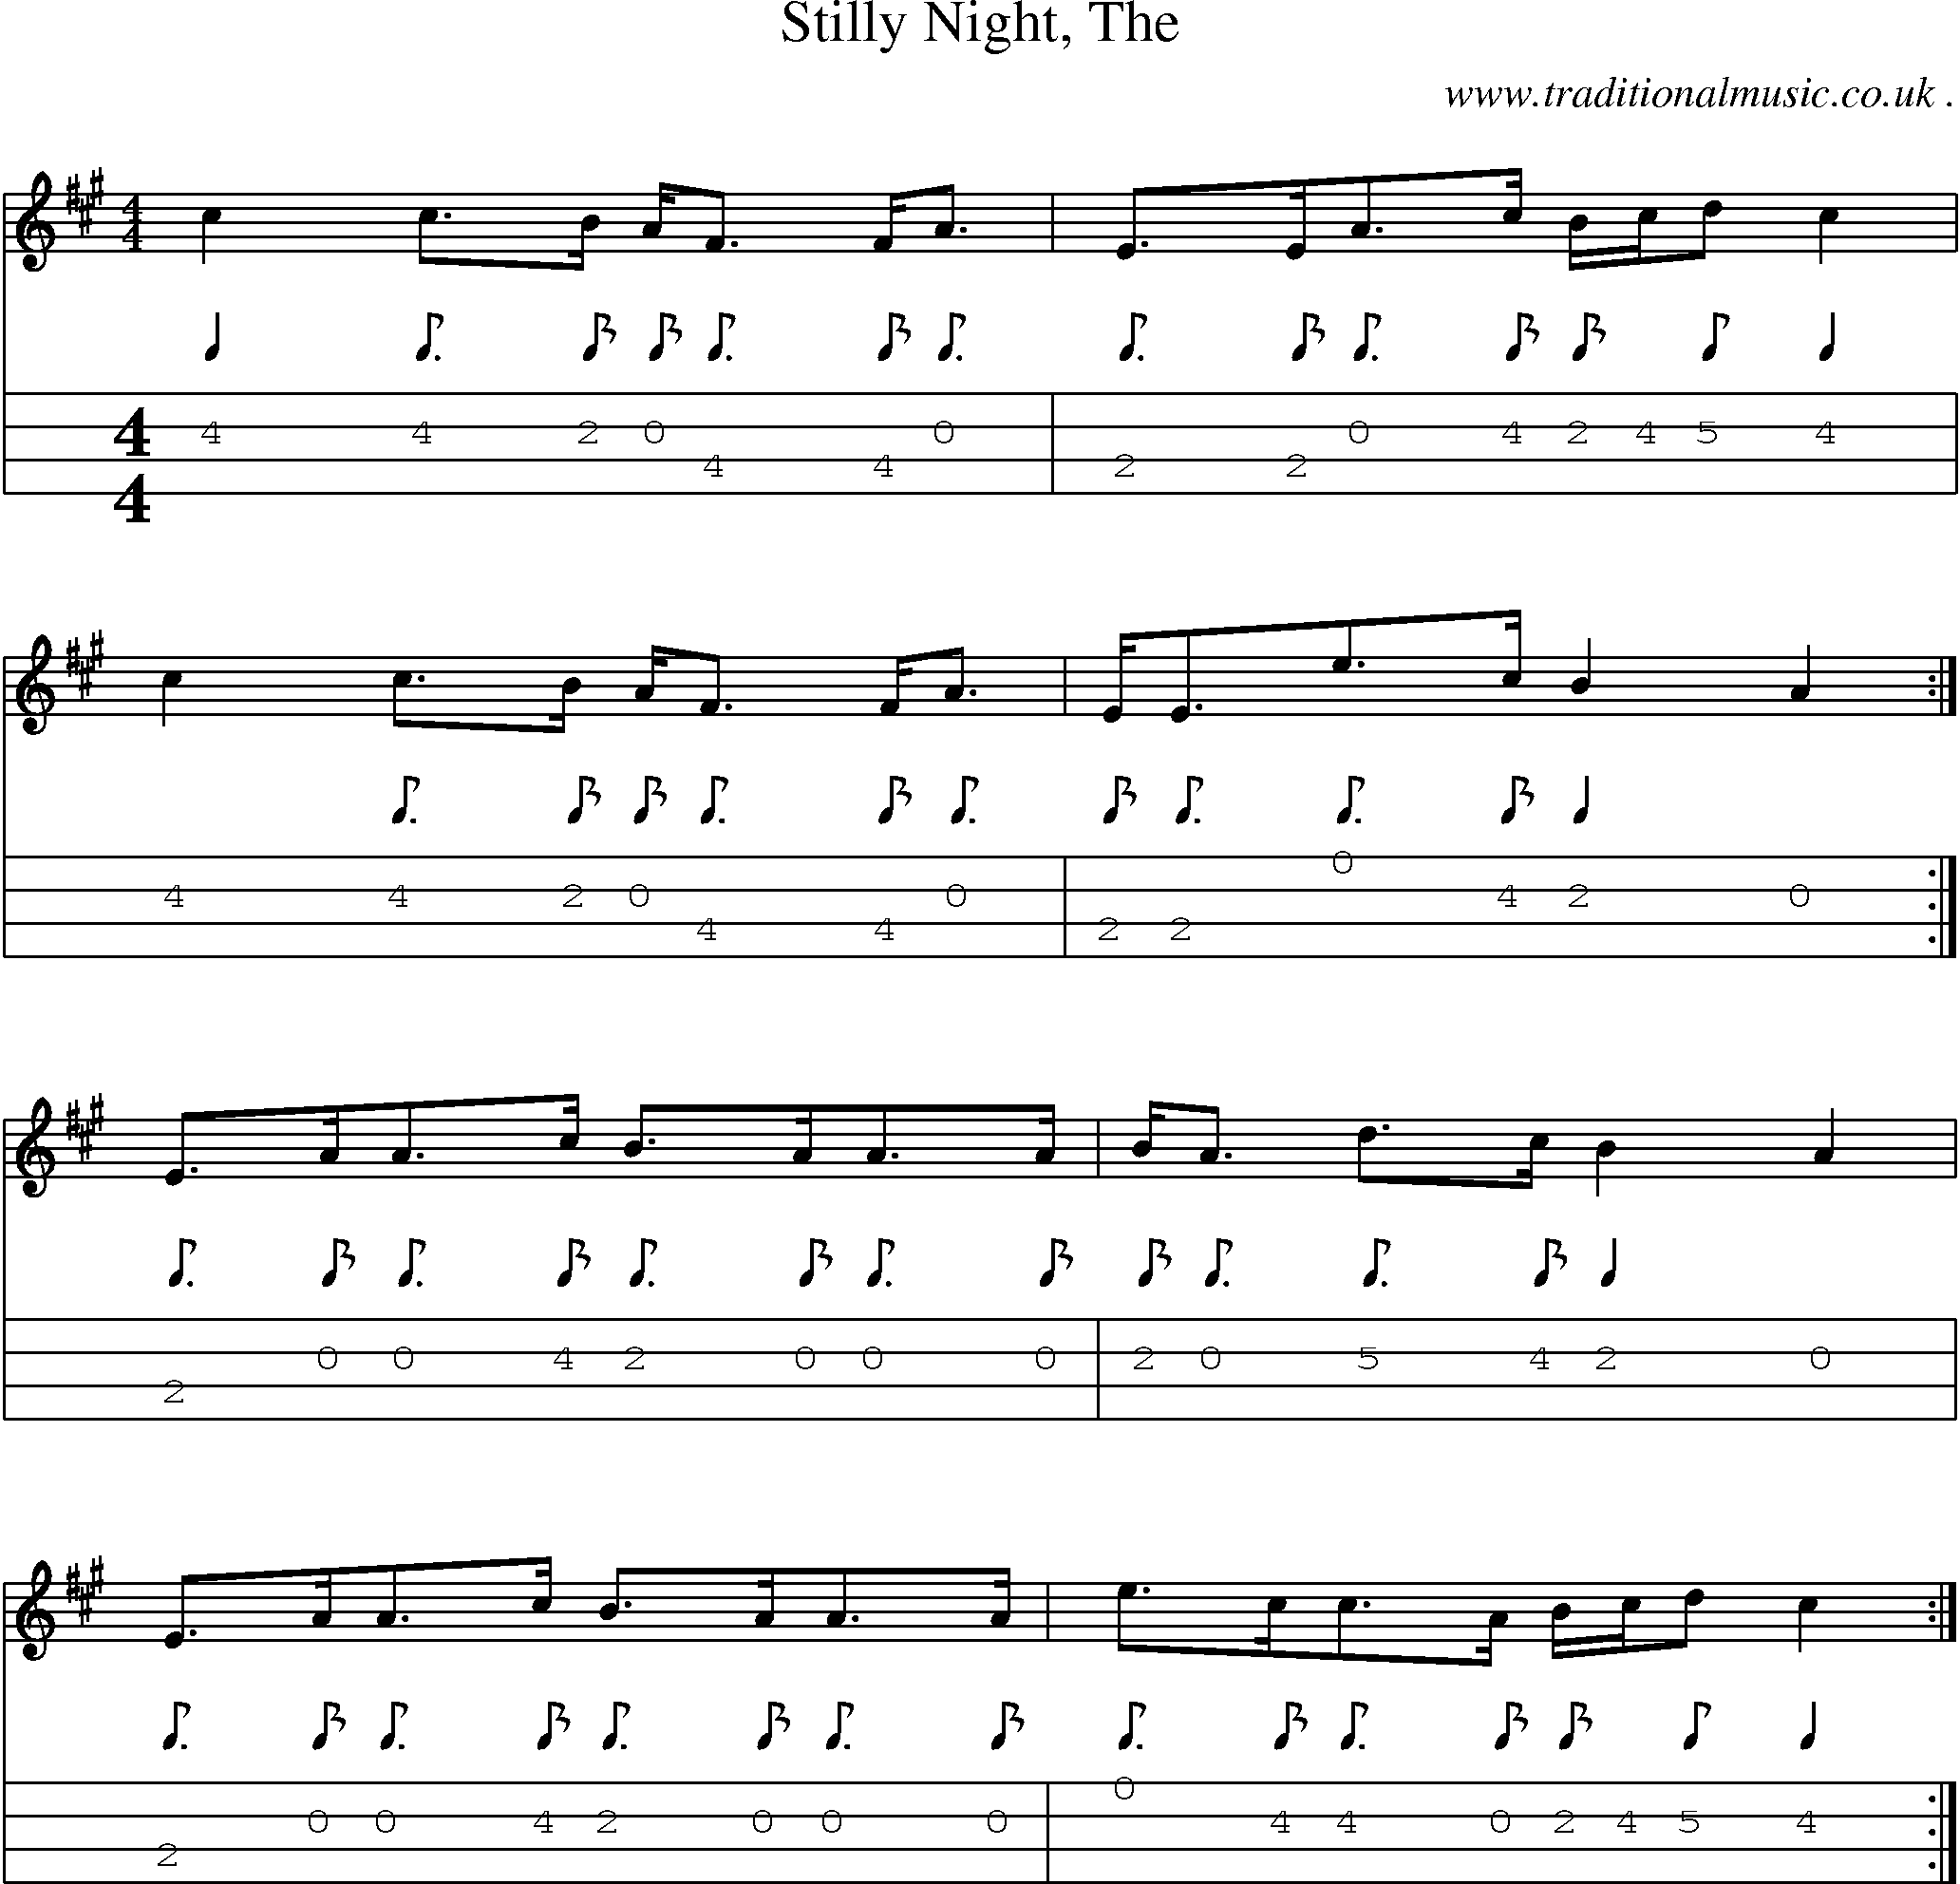 Sheet-music  score, Chords and Mandolin Tabs for Stilly Night The